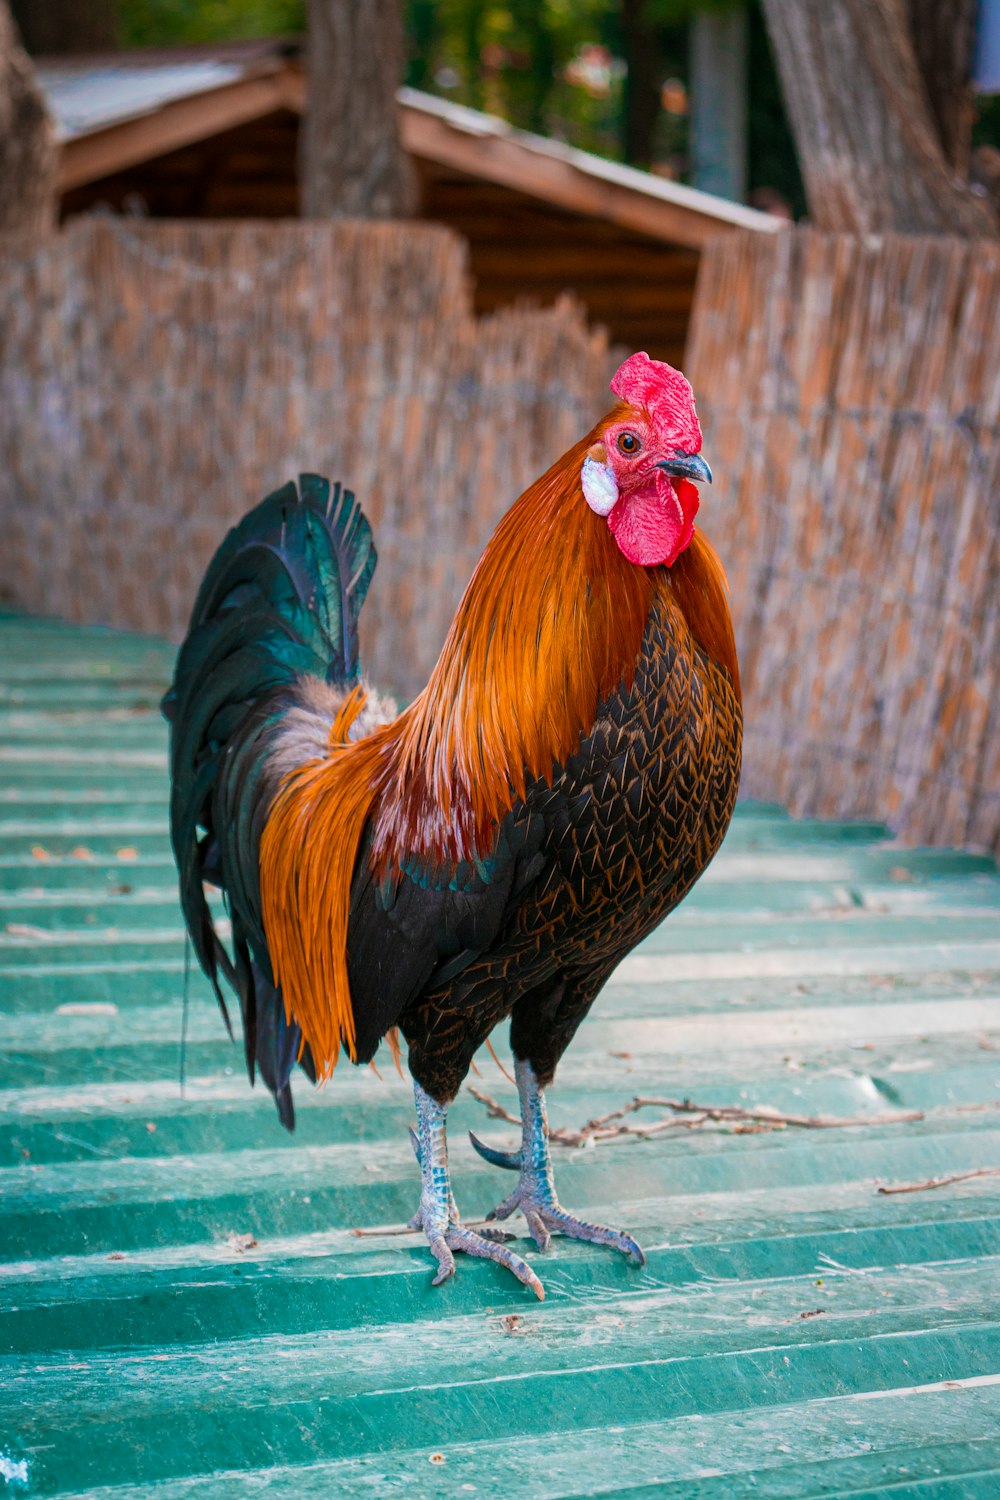 a rooster standing on a wood deck